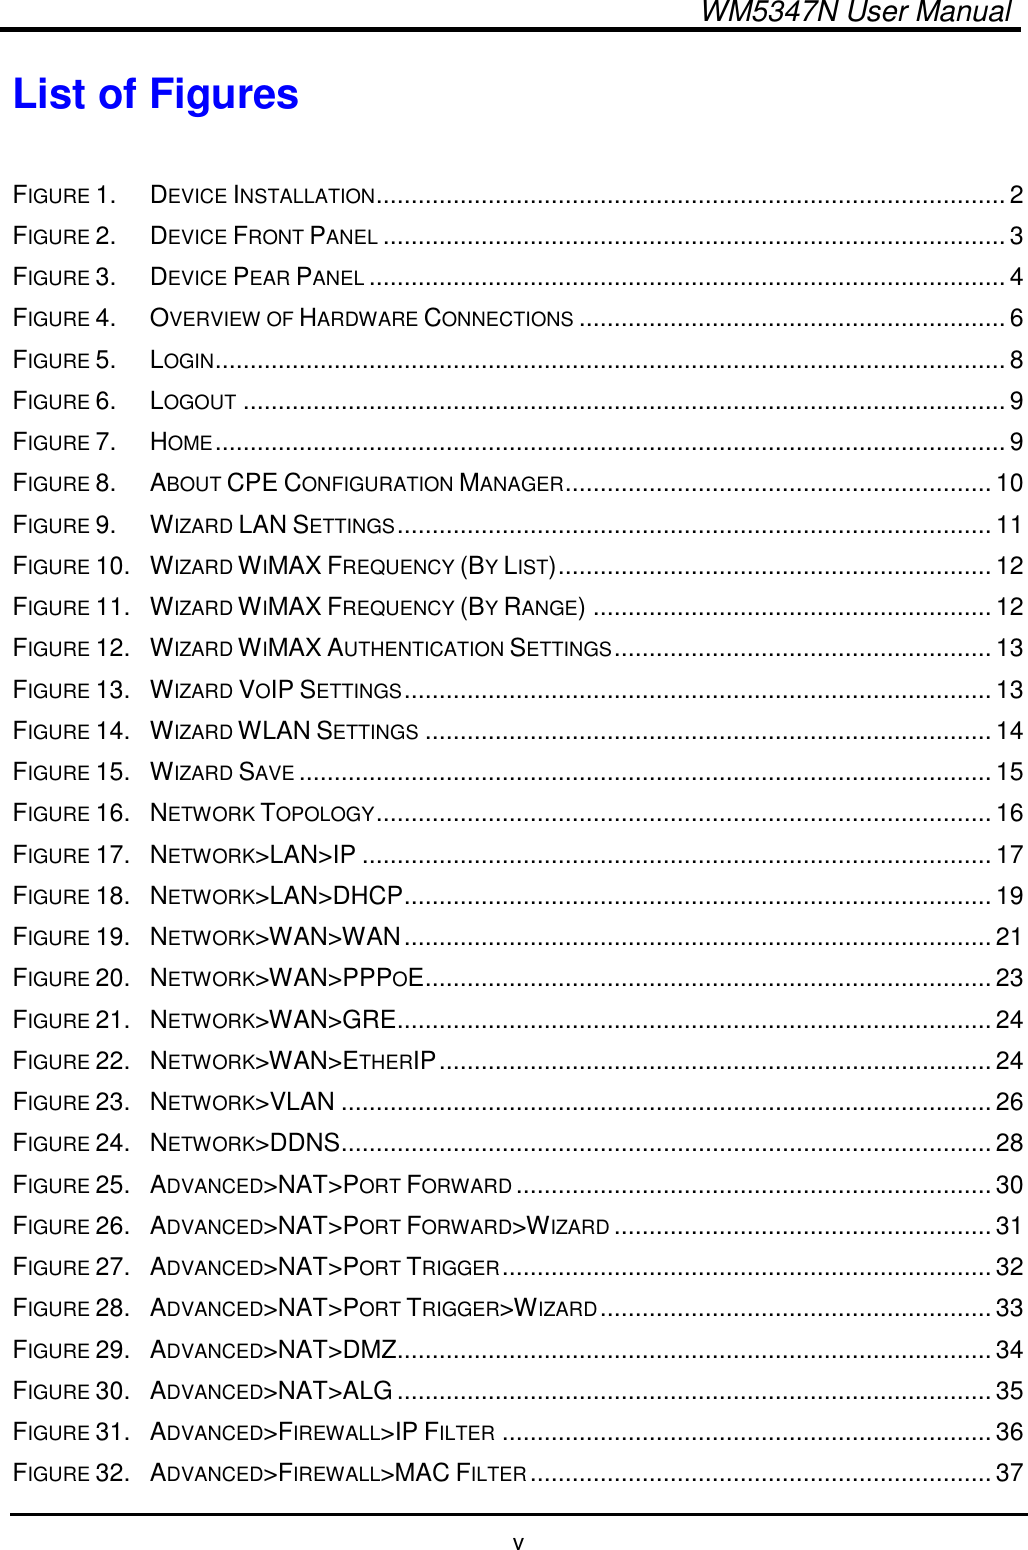   WM5347N User Manual  v List of Figures  FIGURE 1. DEVICE INSTALLATION.......................................................................................... 2 FIGURE 2. DEVICE FRONT PANEL......................................................................................... 3 FIGURE 3. DEVICE PEAR PANEL........................................................................................... 4 FIGURE 4. OVERVIEW OF HARDWARE CONNECTIONS............................................................. 6 FIGURE 5. LOGIN................................................................................................................. 8 FIGURE 6. LOGOUT............................................................................................................. 9 FIGURE 7. HOME................................................................................................................. 9 FIGURE 8. ABOUT CPE CONFIGURATION MANAGER............................................................. 10 FIGURE 9. WIZARD LAN SETTINGS..................................................................................... 11 FIGURE 10. WIZARD WIMAX FREQUENCY (BY LIST).............................................................. 12 FIGURE 11. WIZARD WIMAX FREQUENCY (BY RANGE) ......................................................... 12 FIGURE 12. WIZARD WIMAX AUTHENTICATION SETTINGS...................................................... 13 FIGURE 13. WIZARD VOIP SETTINGS.................................................................................... 13 FIGURE 14. WIZARD WLAN SETTINGS................................................................................. 14 FIGURE 15. WIZARD SAVE................................................................................................... 15 FIGURE 16. NETWORK TOPOLOGY........................................................................................ 16 FIGURE 17. NETWORK&gt;LAN&gt;IP .......................................................................................... 17 FIGURE 18. NETWORK&gt;LAN&gt;DHCP.................................................................................... 19 FIGURE 19. NETWORK&gt;WAN&gt;WAN.................................................................................... 21 FIGURE 20. NETWORK&gt;WAN&gt;PPPOE................................................................................. 23 FIGURE 21. NETWORK&gt;WAN&gt;GRE..................................................................................... 24 FIGURE 22. NETWORK&gt;WAN&gt;ETHERIP............................................................................... 24 FIGURE 23. NETWORK&gt;VLAN ............................................................................................. 26 FIGURE 24. NETWORK&gt;DDNS............................................................................................. 28 FIGURE 25. ADVANCED&gt;NAT&gt;PORT FORWARD.................................................................... 30 FIGURE 26. ADVANCED&gt;NAT&gt;PORT FORWARD&gt;WIZARD...................................................... 31 FIGURE 27. ADVANCED&gt;NAT&gt;PORT TRIGGER...................................................................... 32 FIGURE 28. ADVANCED&gt;NAT&gt;PORT TRIGGER&gt;WIZARD........................................................ 33 FIGURE 29. ADVANCED&gt;NAT&gt;DMZ..................................................................................... 34 FIGURE 30. ADVANCED&gt;NAT&gt;ALG ..................................................................................... 35 FIGURE 31. ADVANCED&gt;FIREWALL&gt;IP FILTER...................................................................... 36 FIGURE 32. ADVANCED&gt;FIREWALL&gt;MAC FILTER.................................................................. 37 